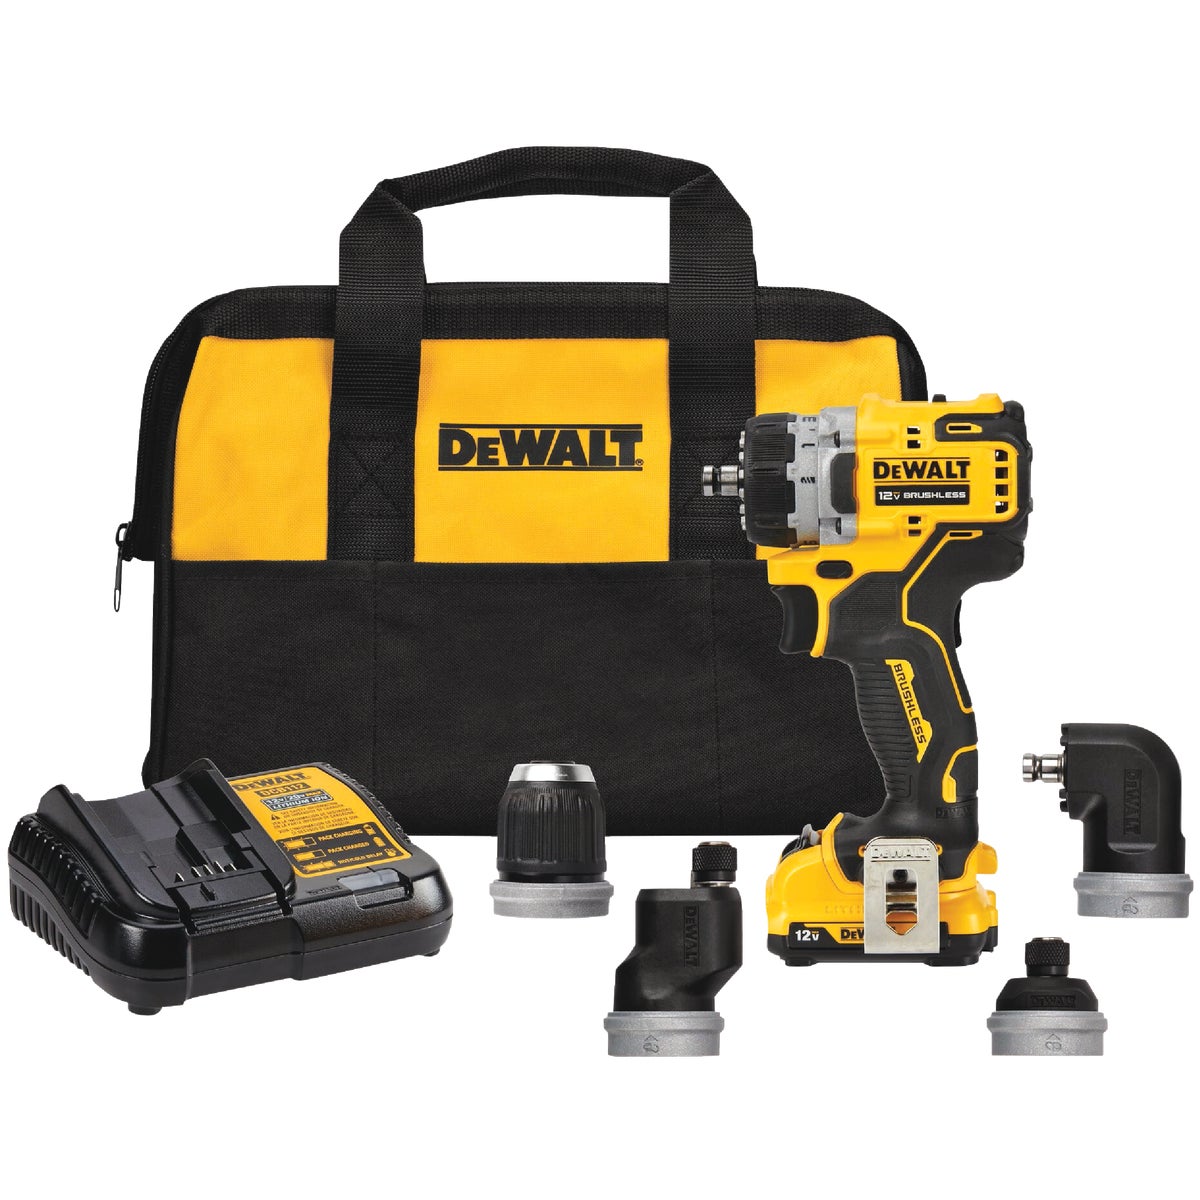 DEWALT XTREME 12 Volt MAX Lithium-Ion 3/8 In. Brushless 5-In-1 Cordless Drill/Driver Kit